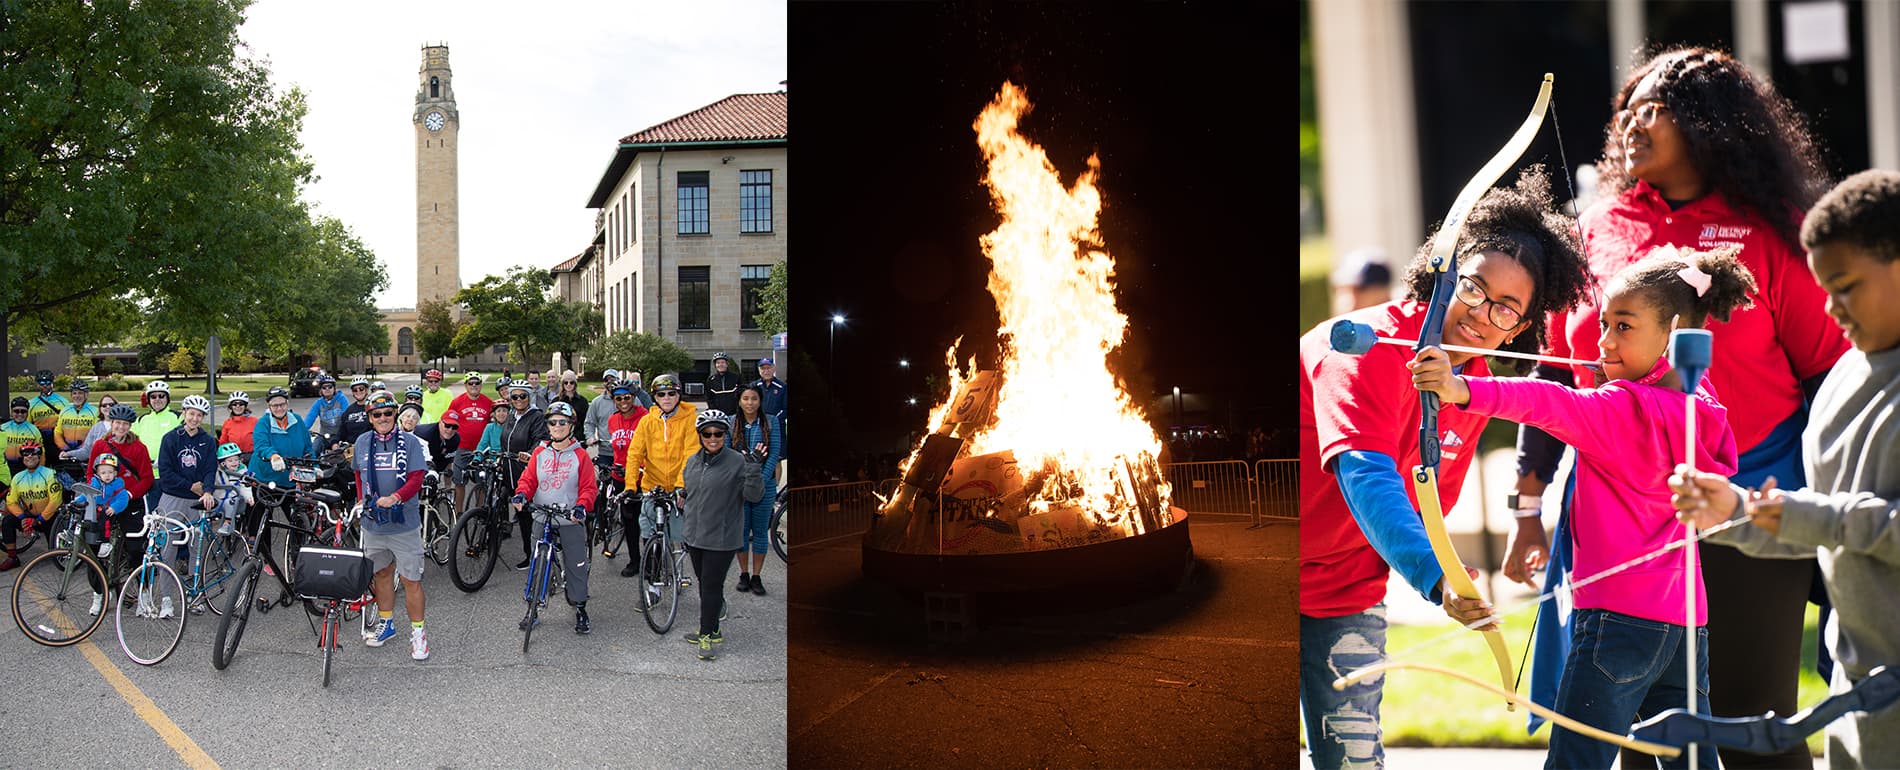 A large group of people with bikes outdoors in front of a clock tower at left, in the middle a photo of a bonfire at night and on the right, students help children shoot a toy bow and arrow.